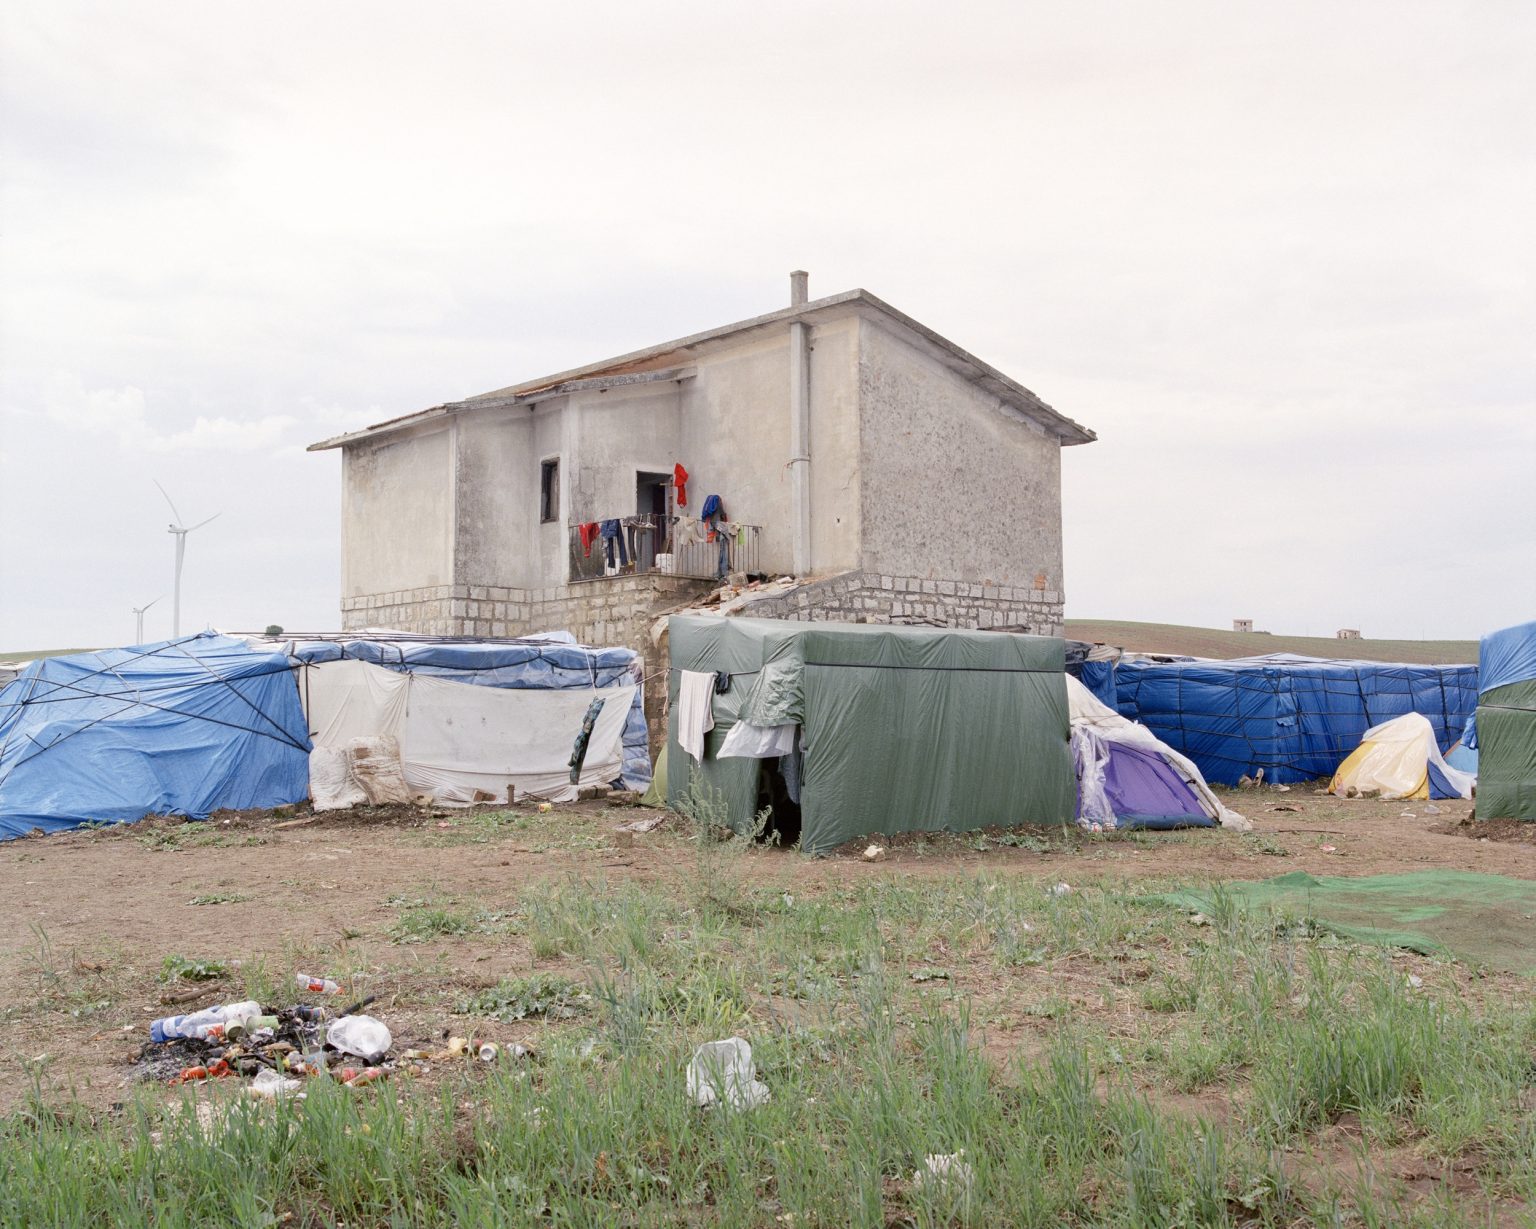 Palazzo San Gervasio (PZ), 2016. Ghetto of Mulini Matinelle, informal camp where about 500 daily laborers live during the season of the tomato harvesting in Basilicata. The ghetto was established by the occupation of some houses of the agrarian reform and soon expanded with temporary shacks without toilets, electricity and running water. ><

Palazzo San Gervasio (PZ), 2016. Ghetto di Mulini Matinelle, campo temporaneo dove vivono circa 500 lavoratori Africani durante la stagione della raccolta dei pomodori in Basilicata. Il ghetto nasce dalloccupazione di alcune case della riforma agraria e in breve tempo si è espanso con baracche temporanee senza servizi igienici, elettricità e acqua corrente.